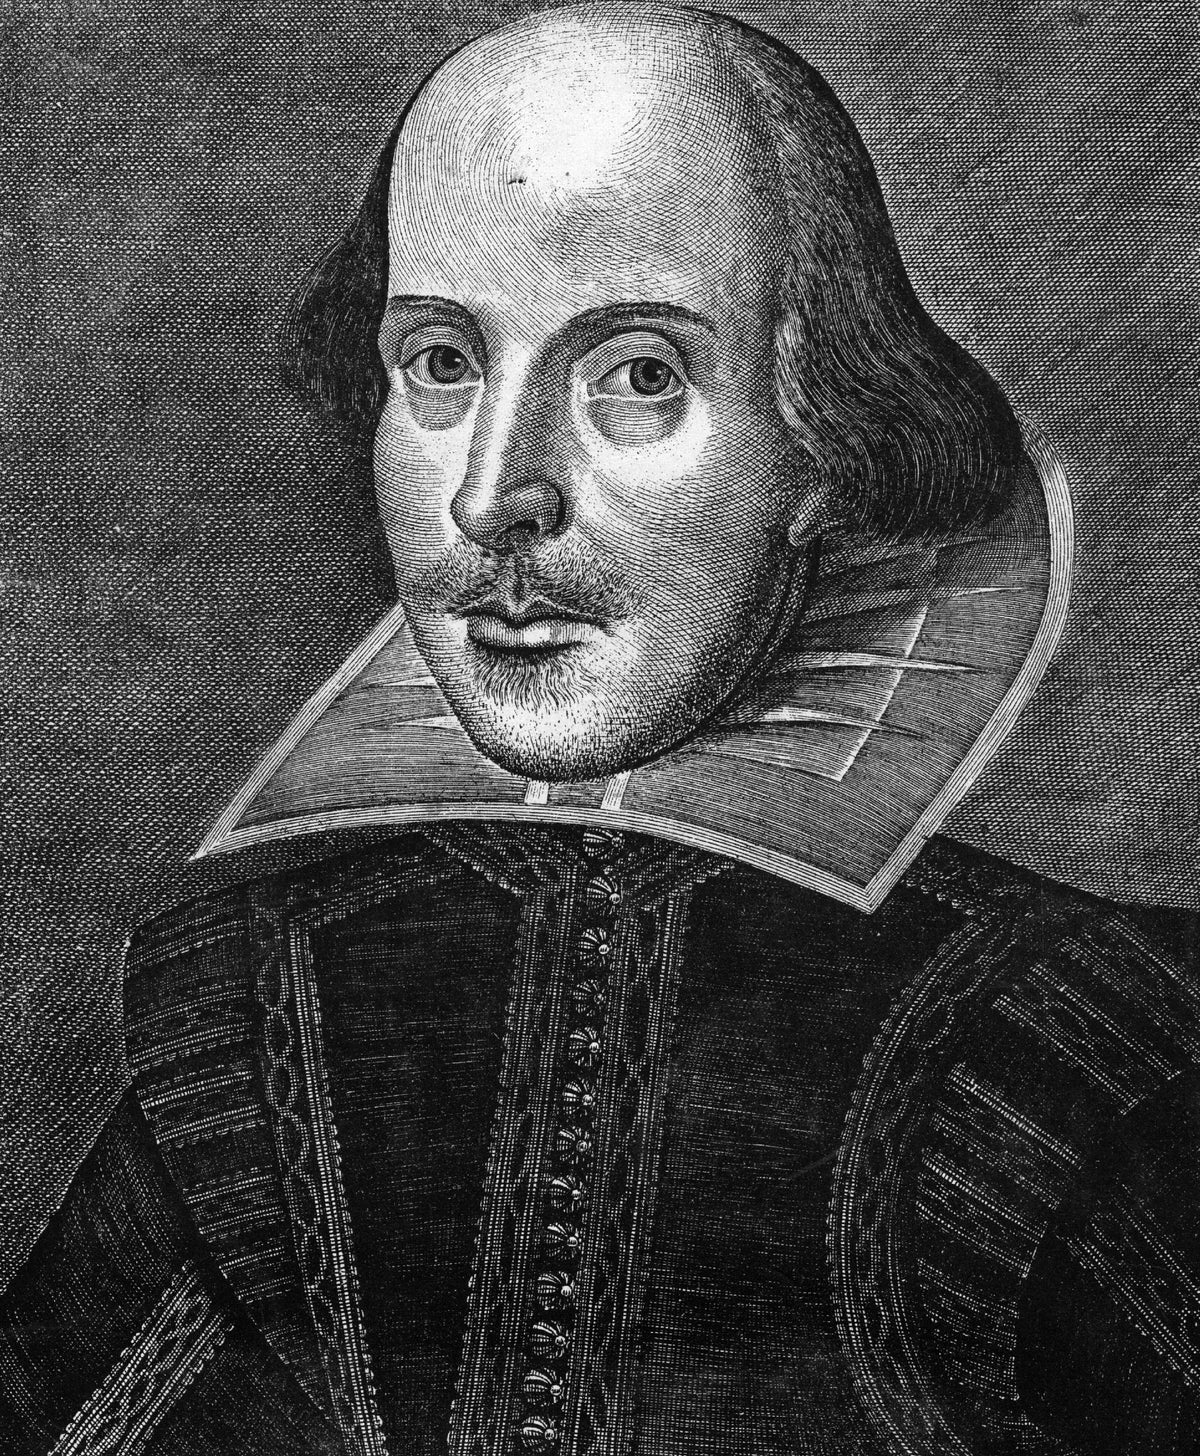 London Library faces backlash over event with writer who suggests Shakespeare was woman